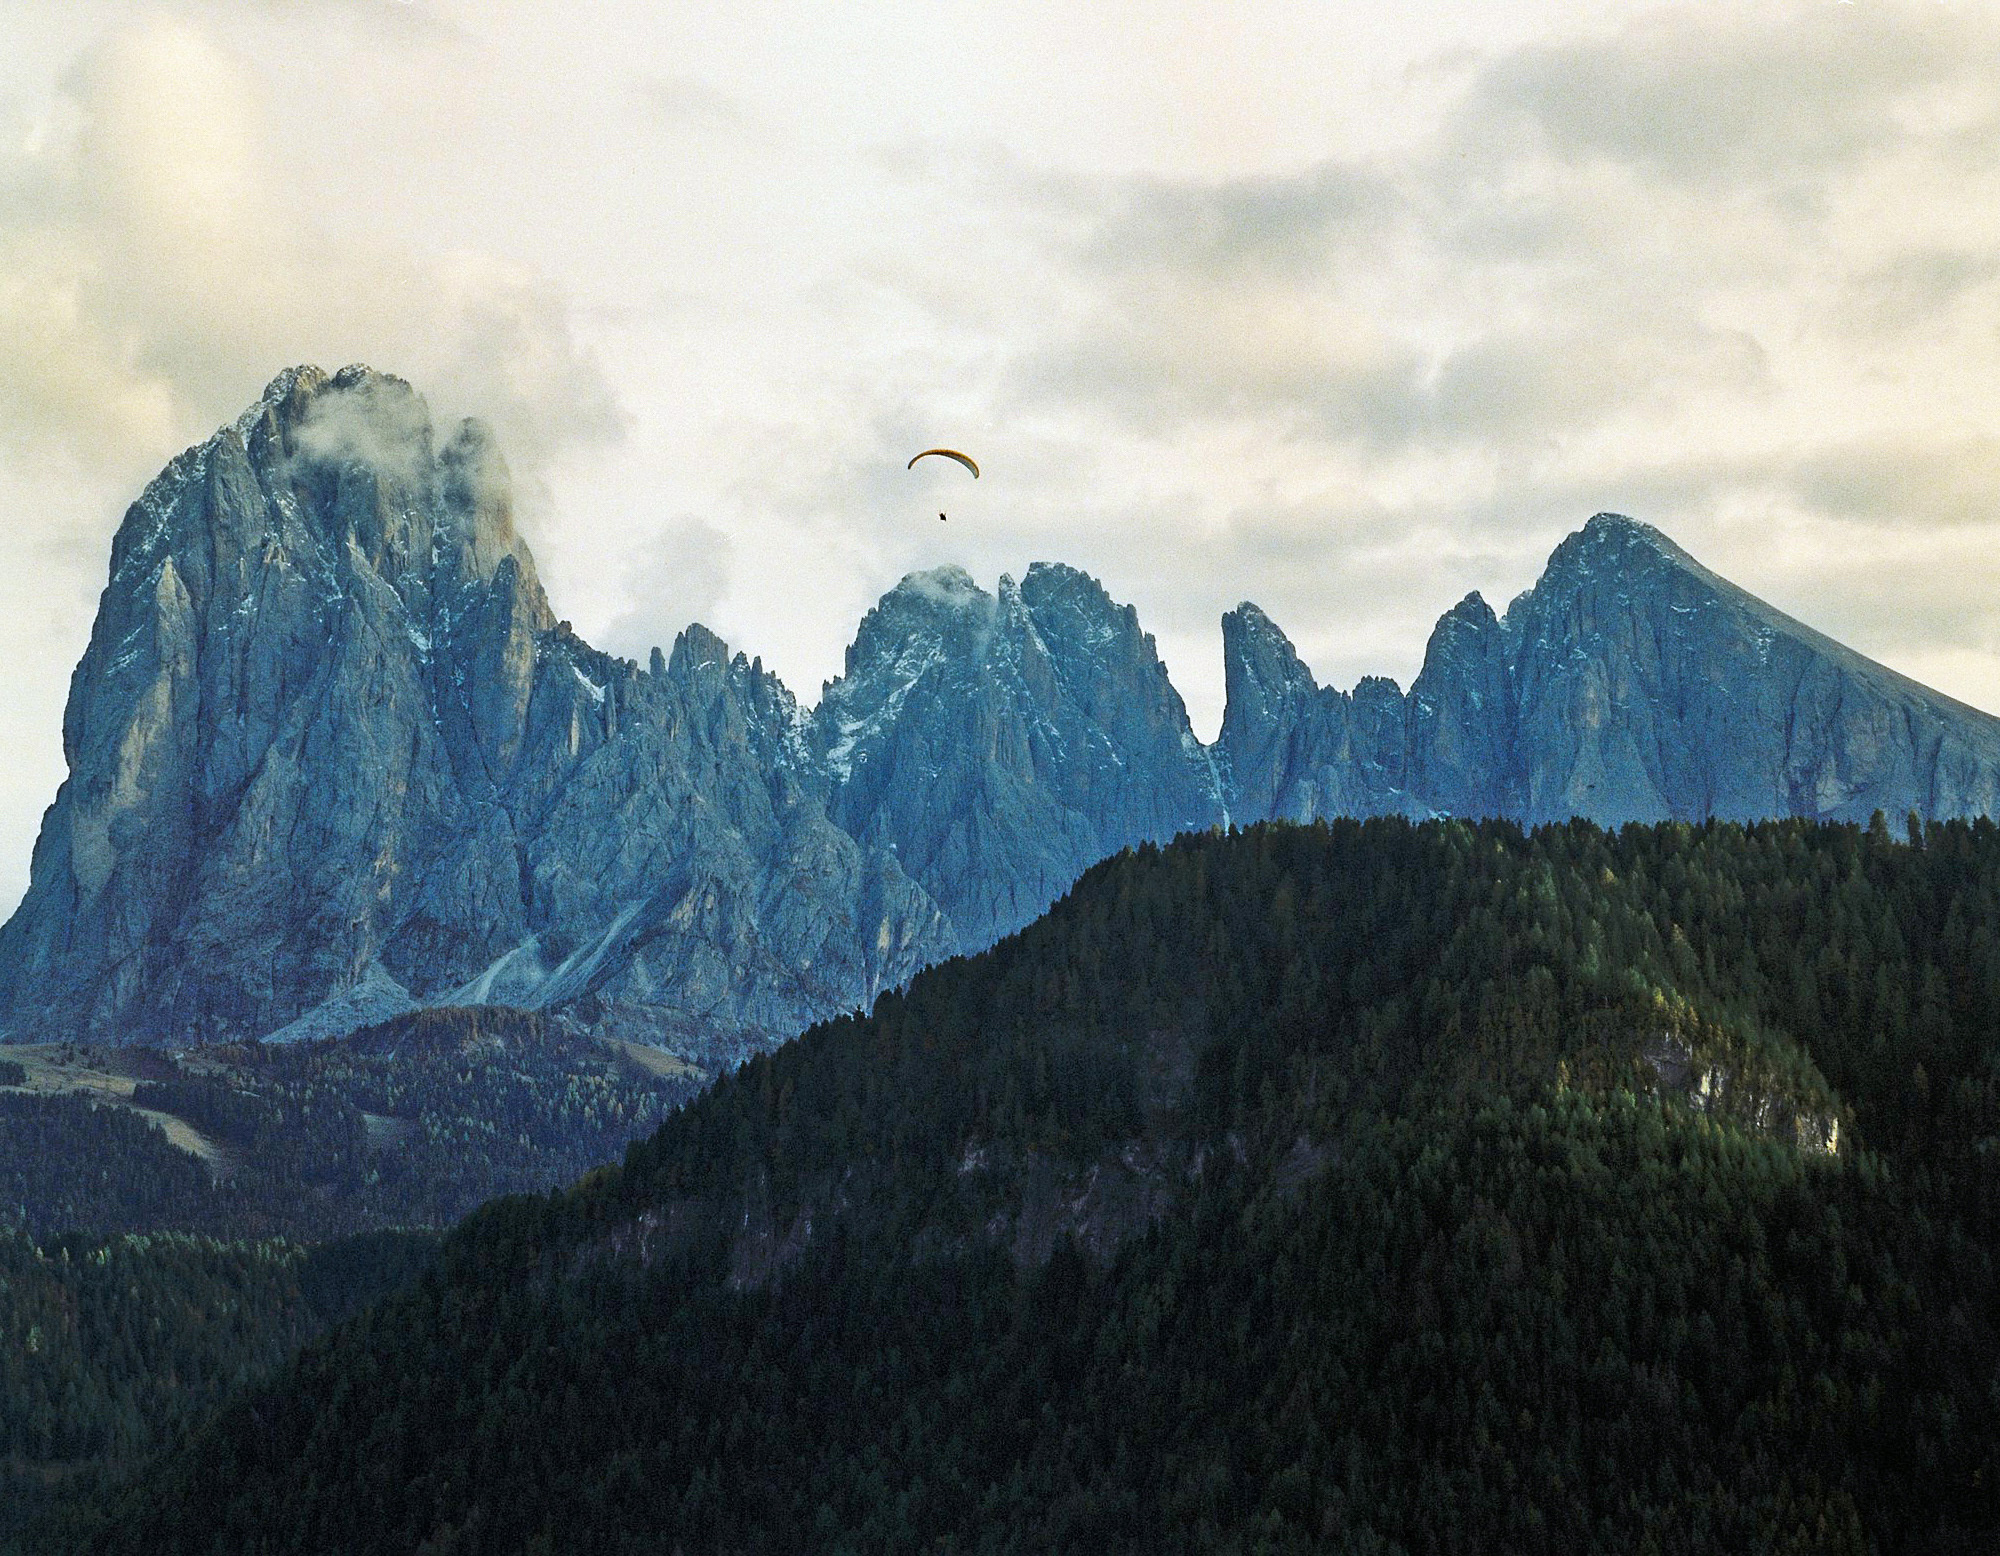 <p>A paraglider over the Langkofel (Sassolungo) massif in the Dolomites. <br /></p>
<p>Shot with Pentax 645N, 645 FA 80-160, Cinestill 800.<br /></p>